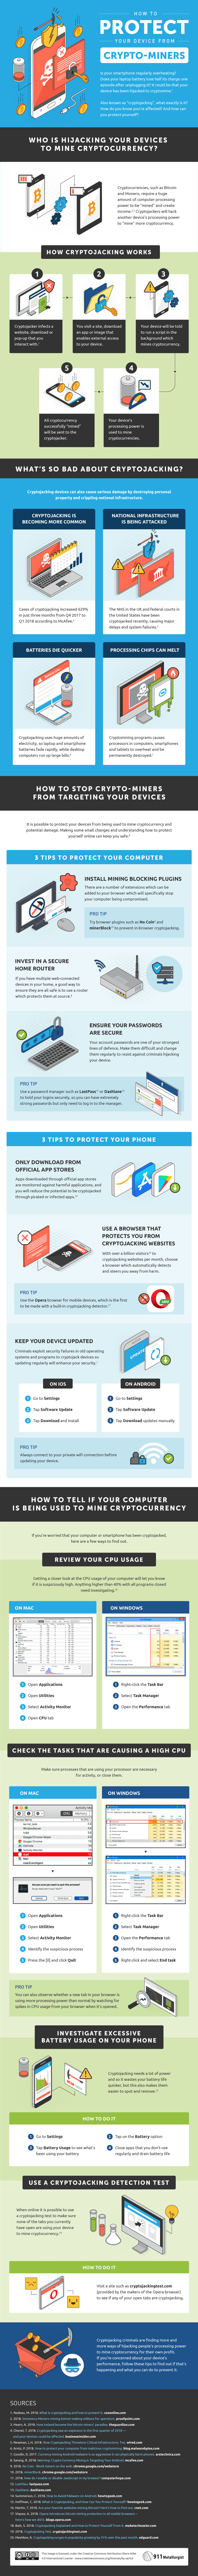 How to Protect Your Devices from Crypto-miners [Infographic]